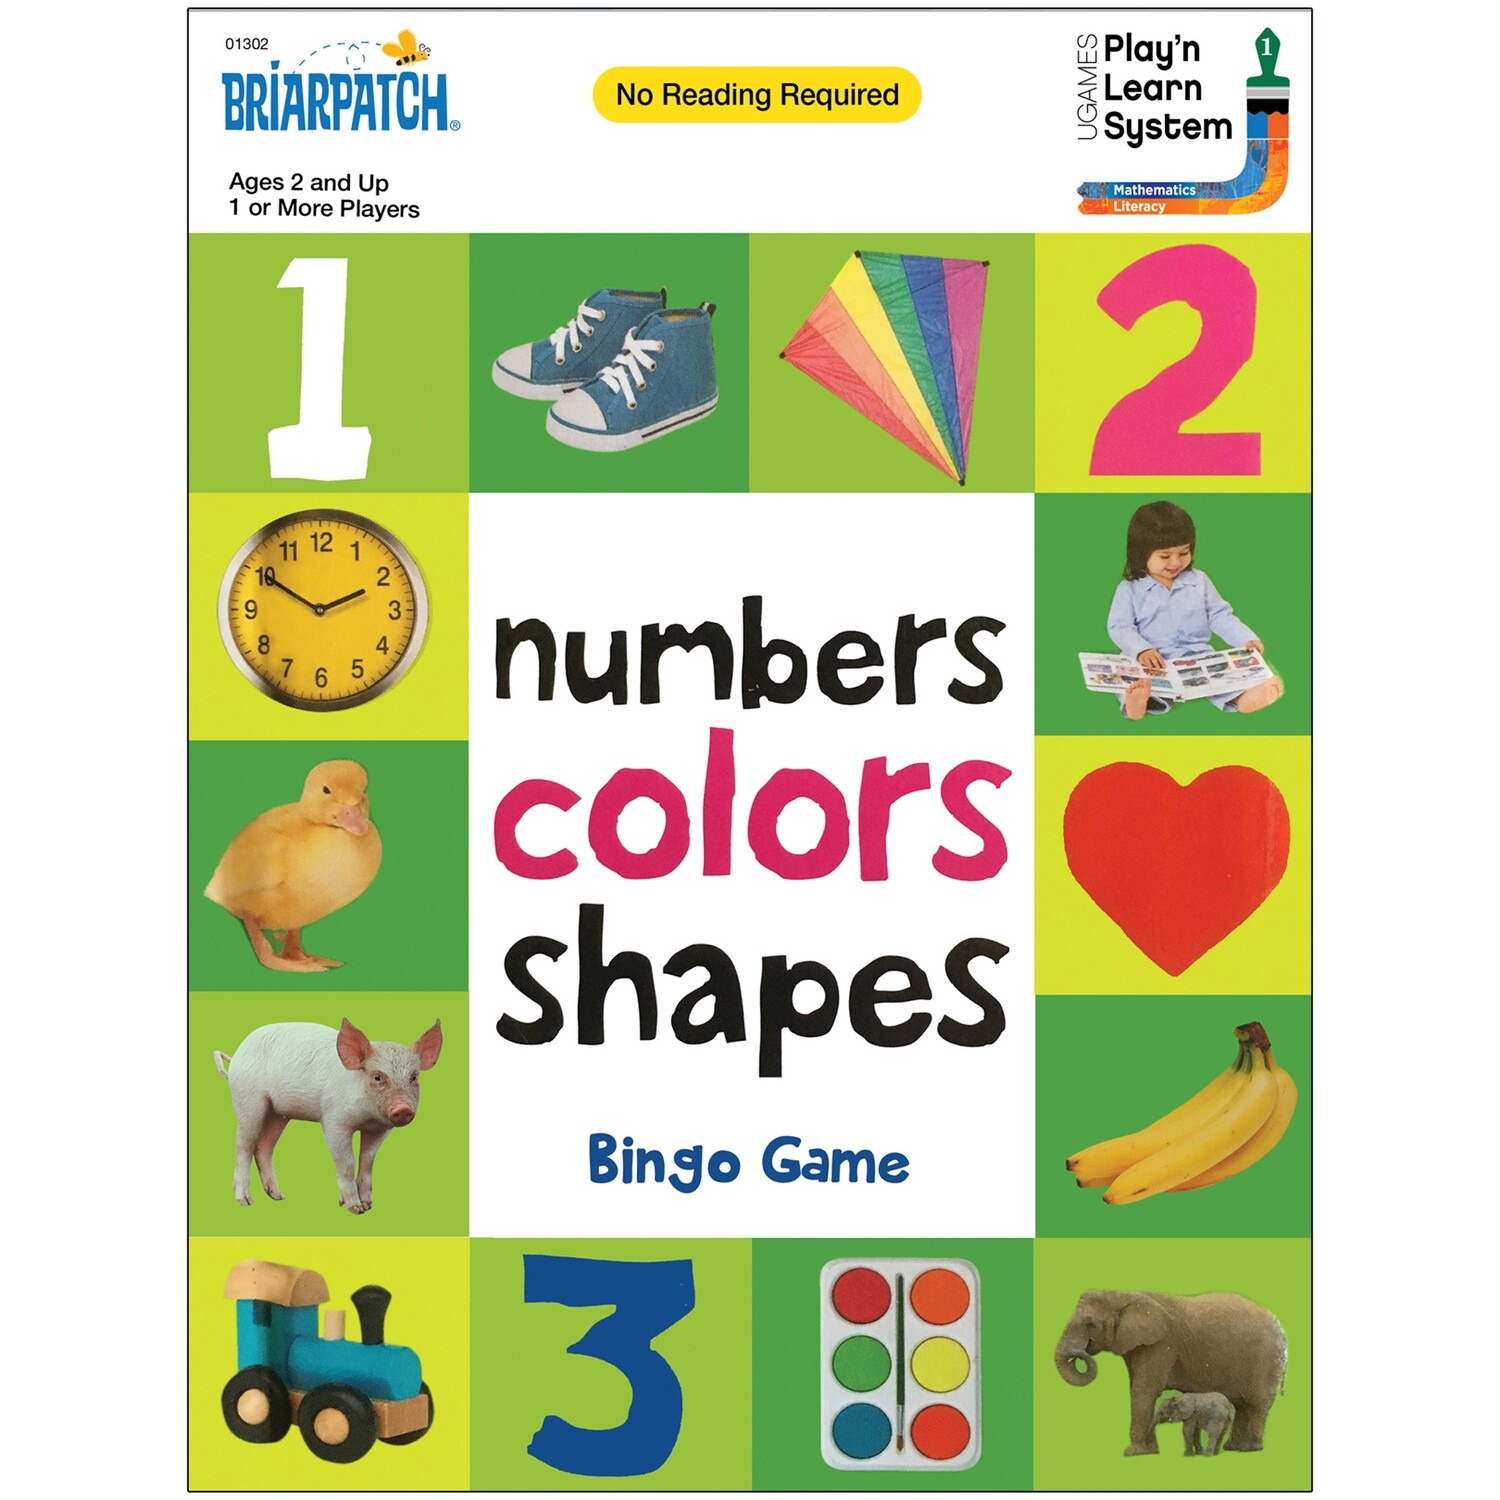 First 100 Numbers Shapes Bingo Game